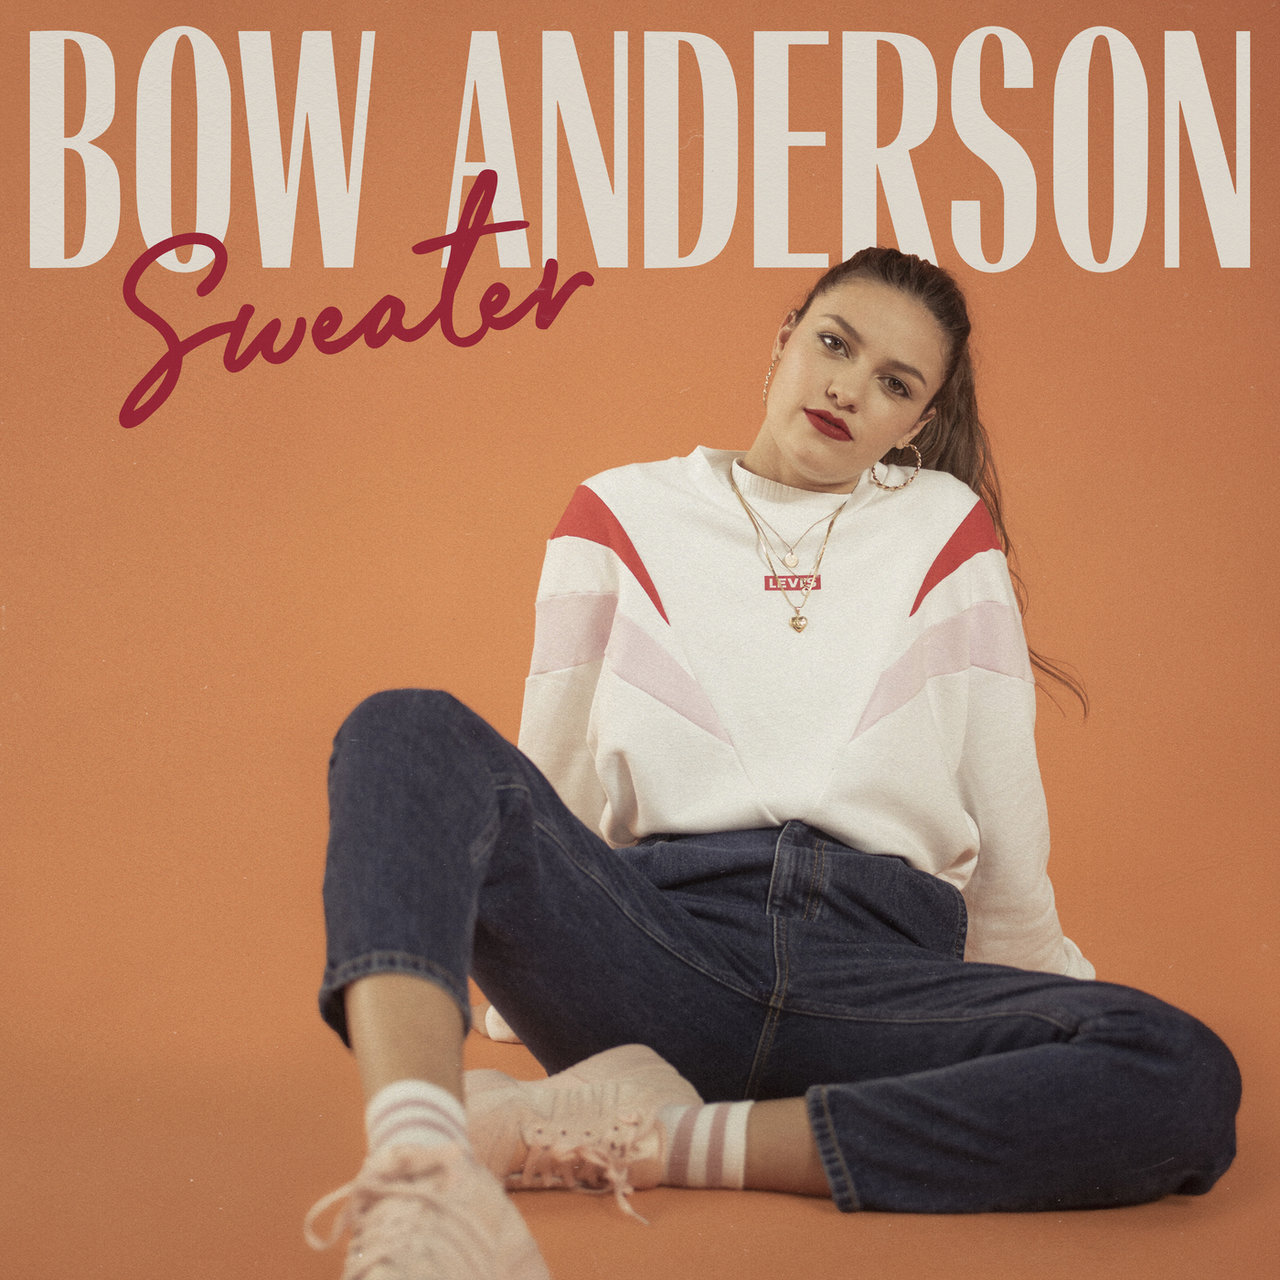 Bow Anderson — Sweater cover artwork